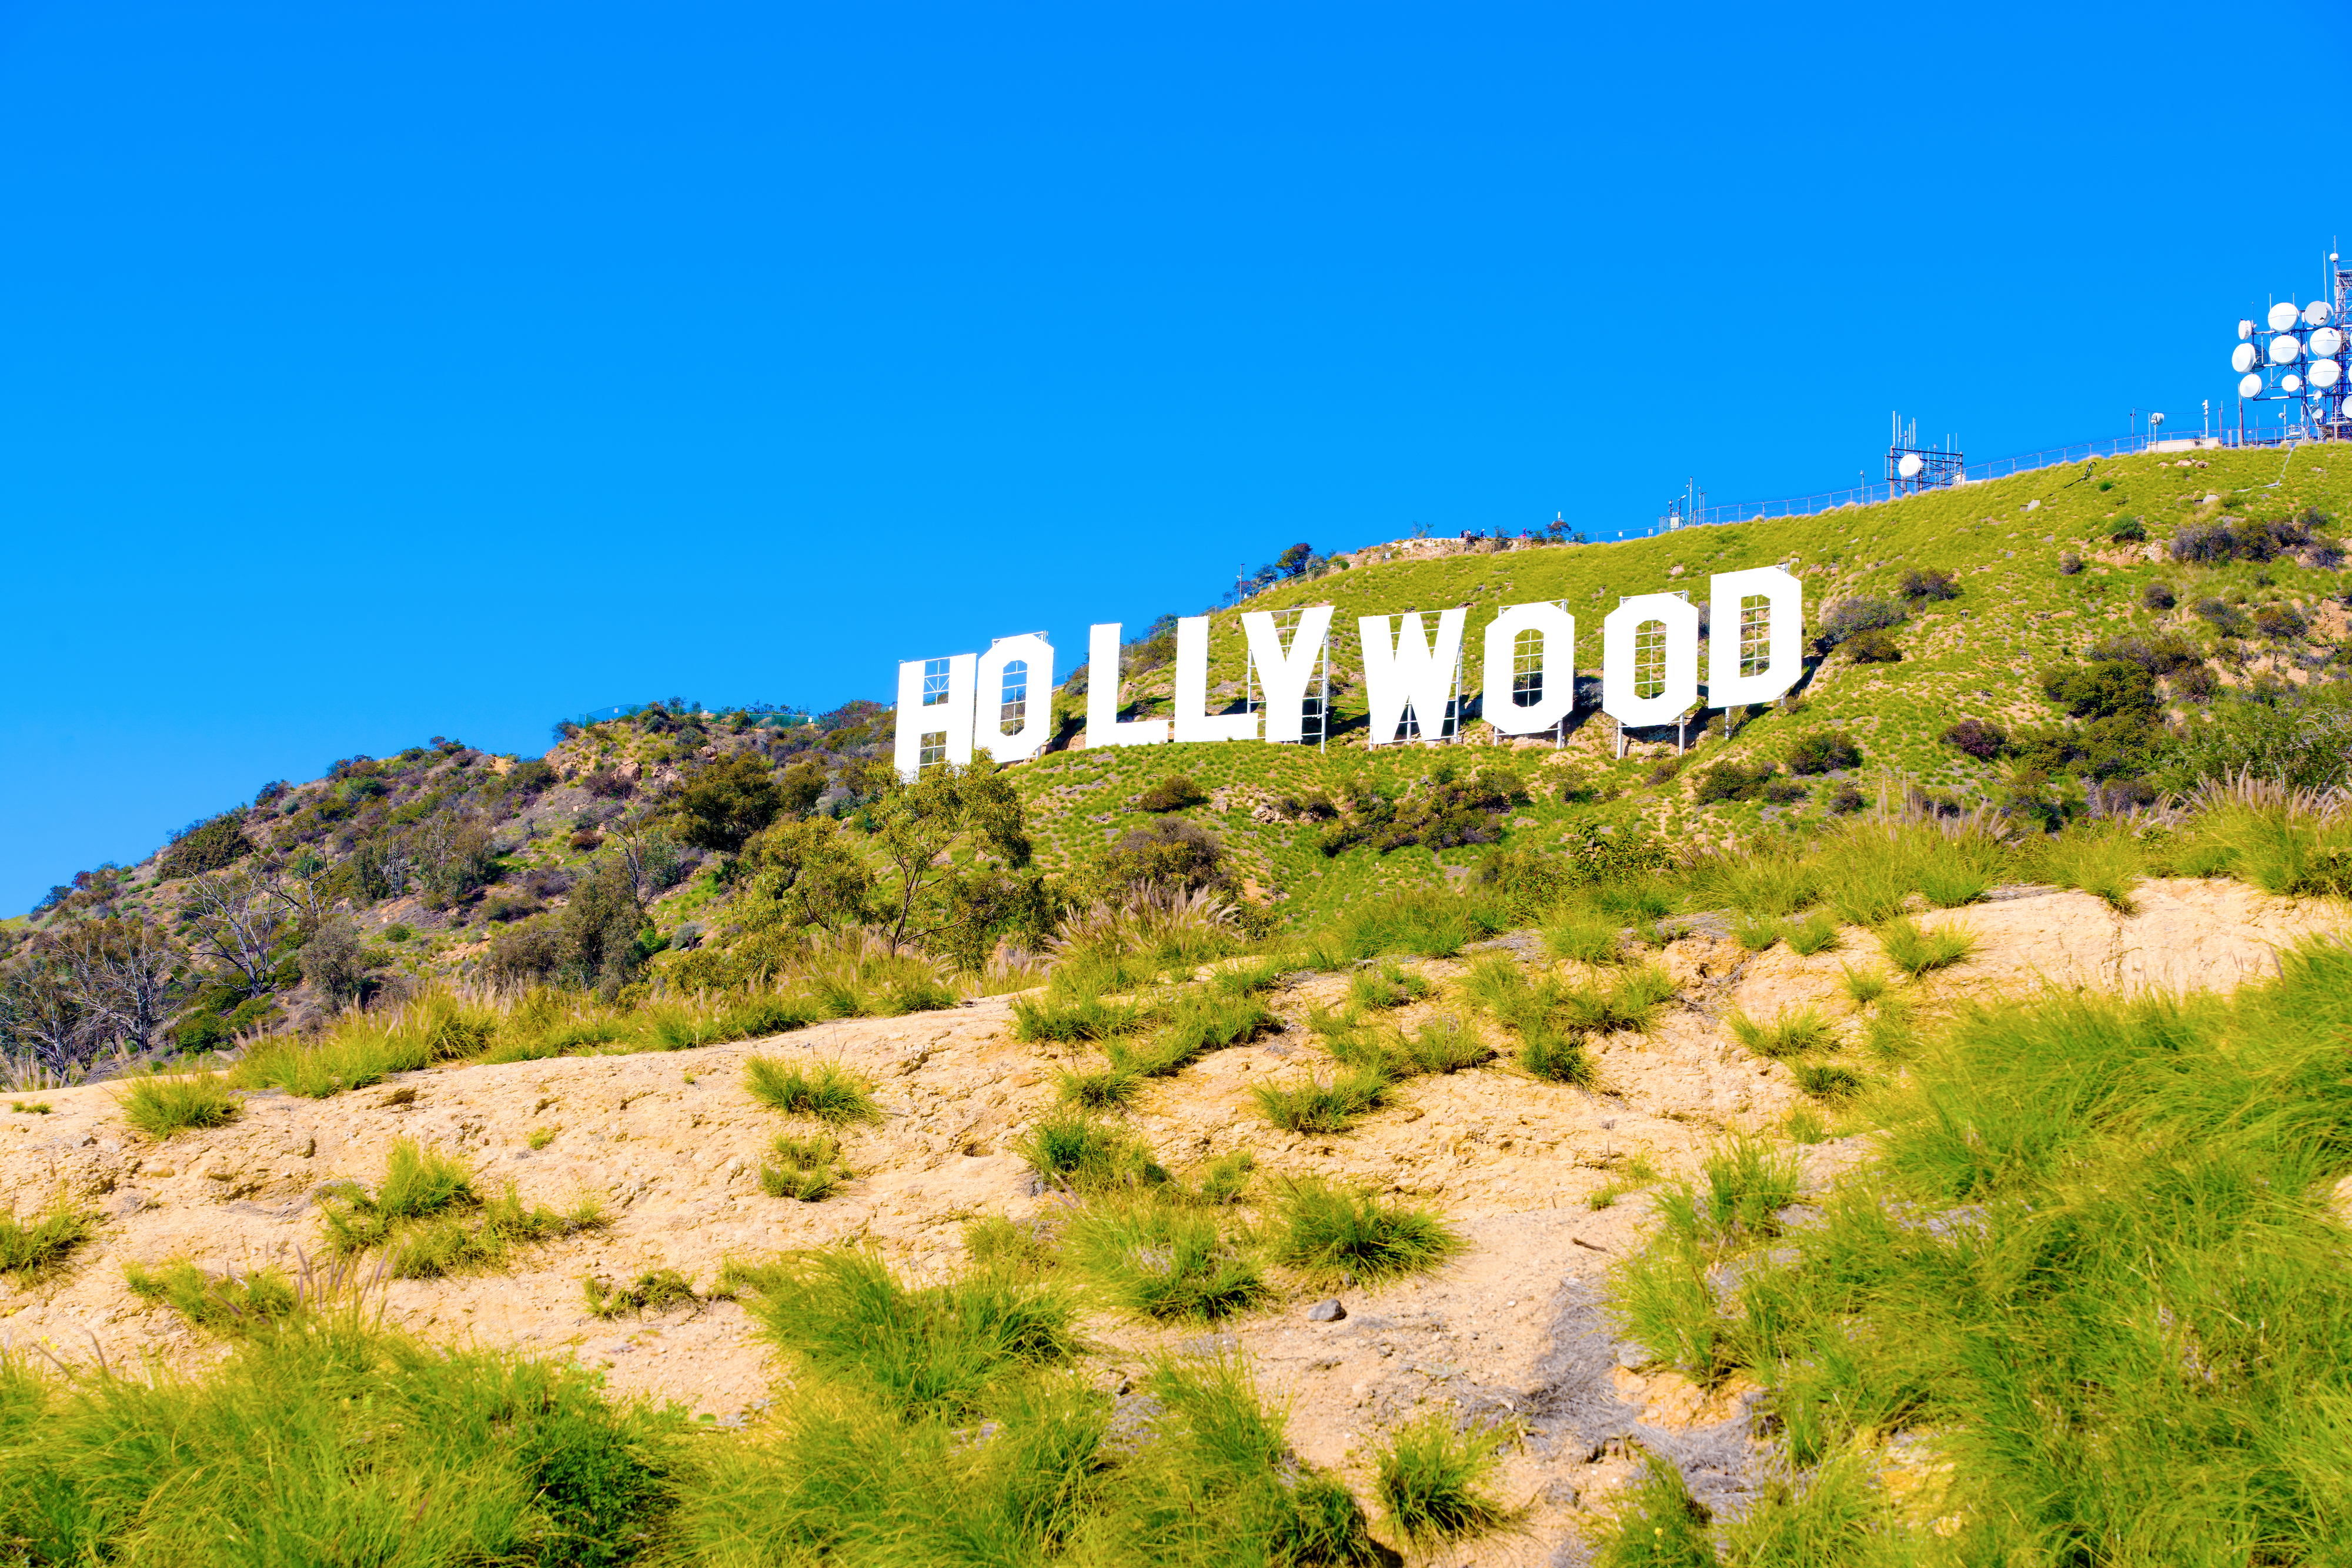 The image features the iconic Hollywood sign situated on a hillside, with clear sky above